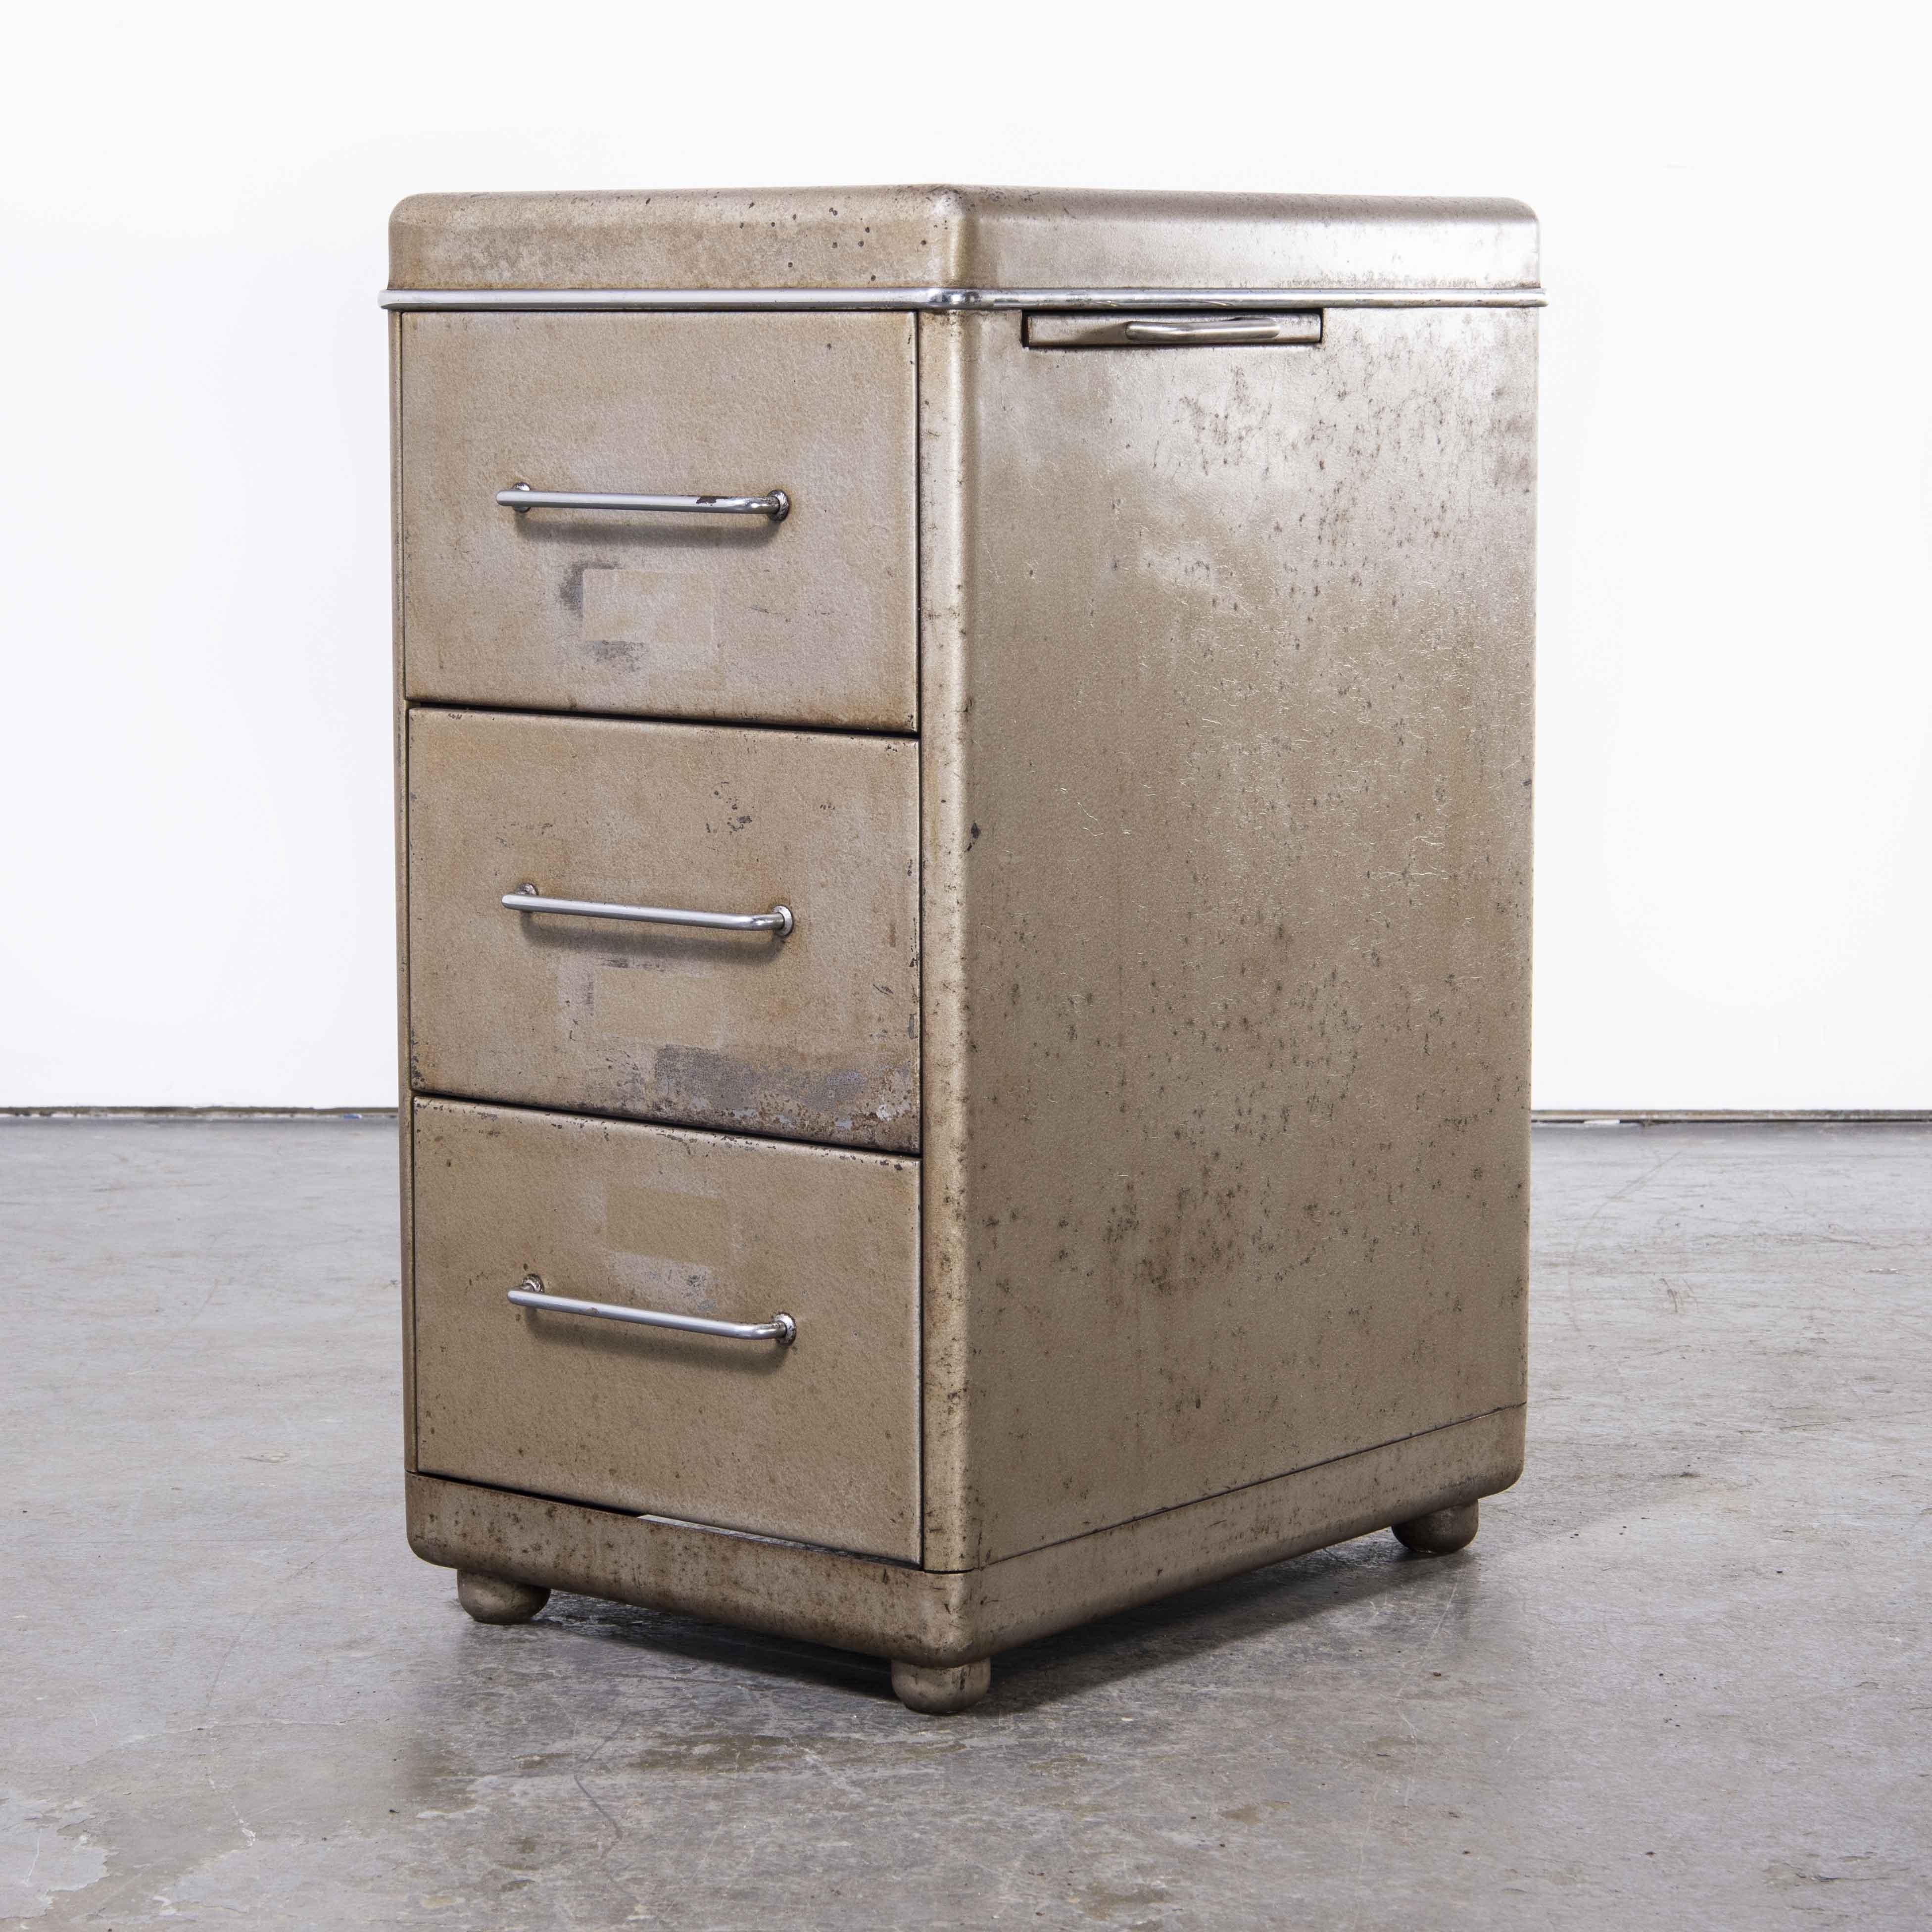 1950s filing cabinet